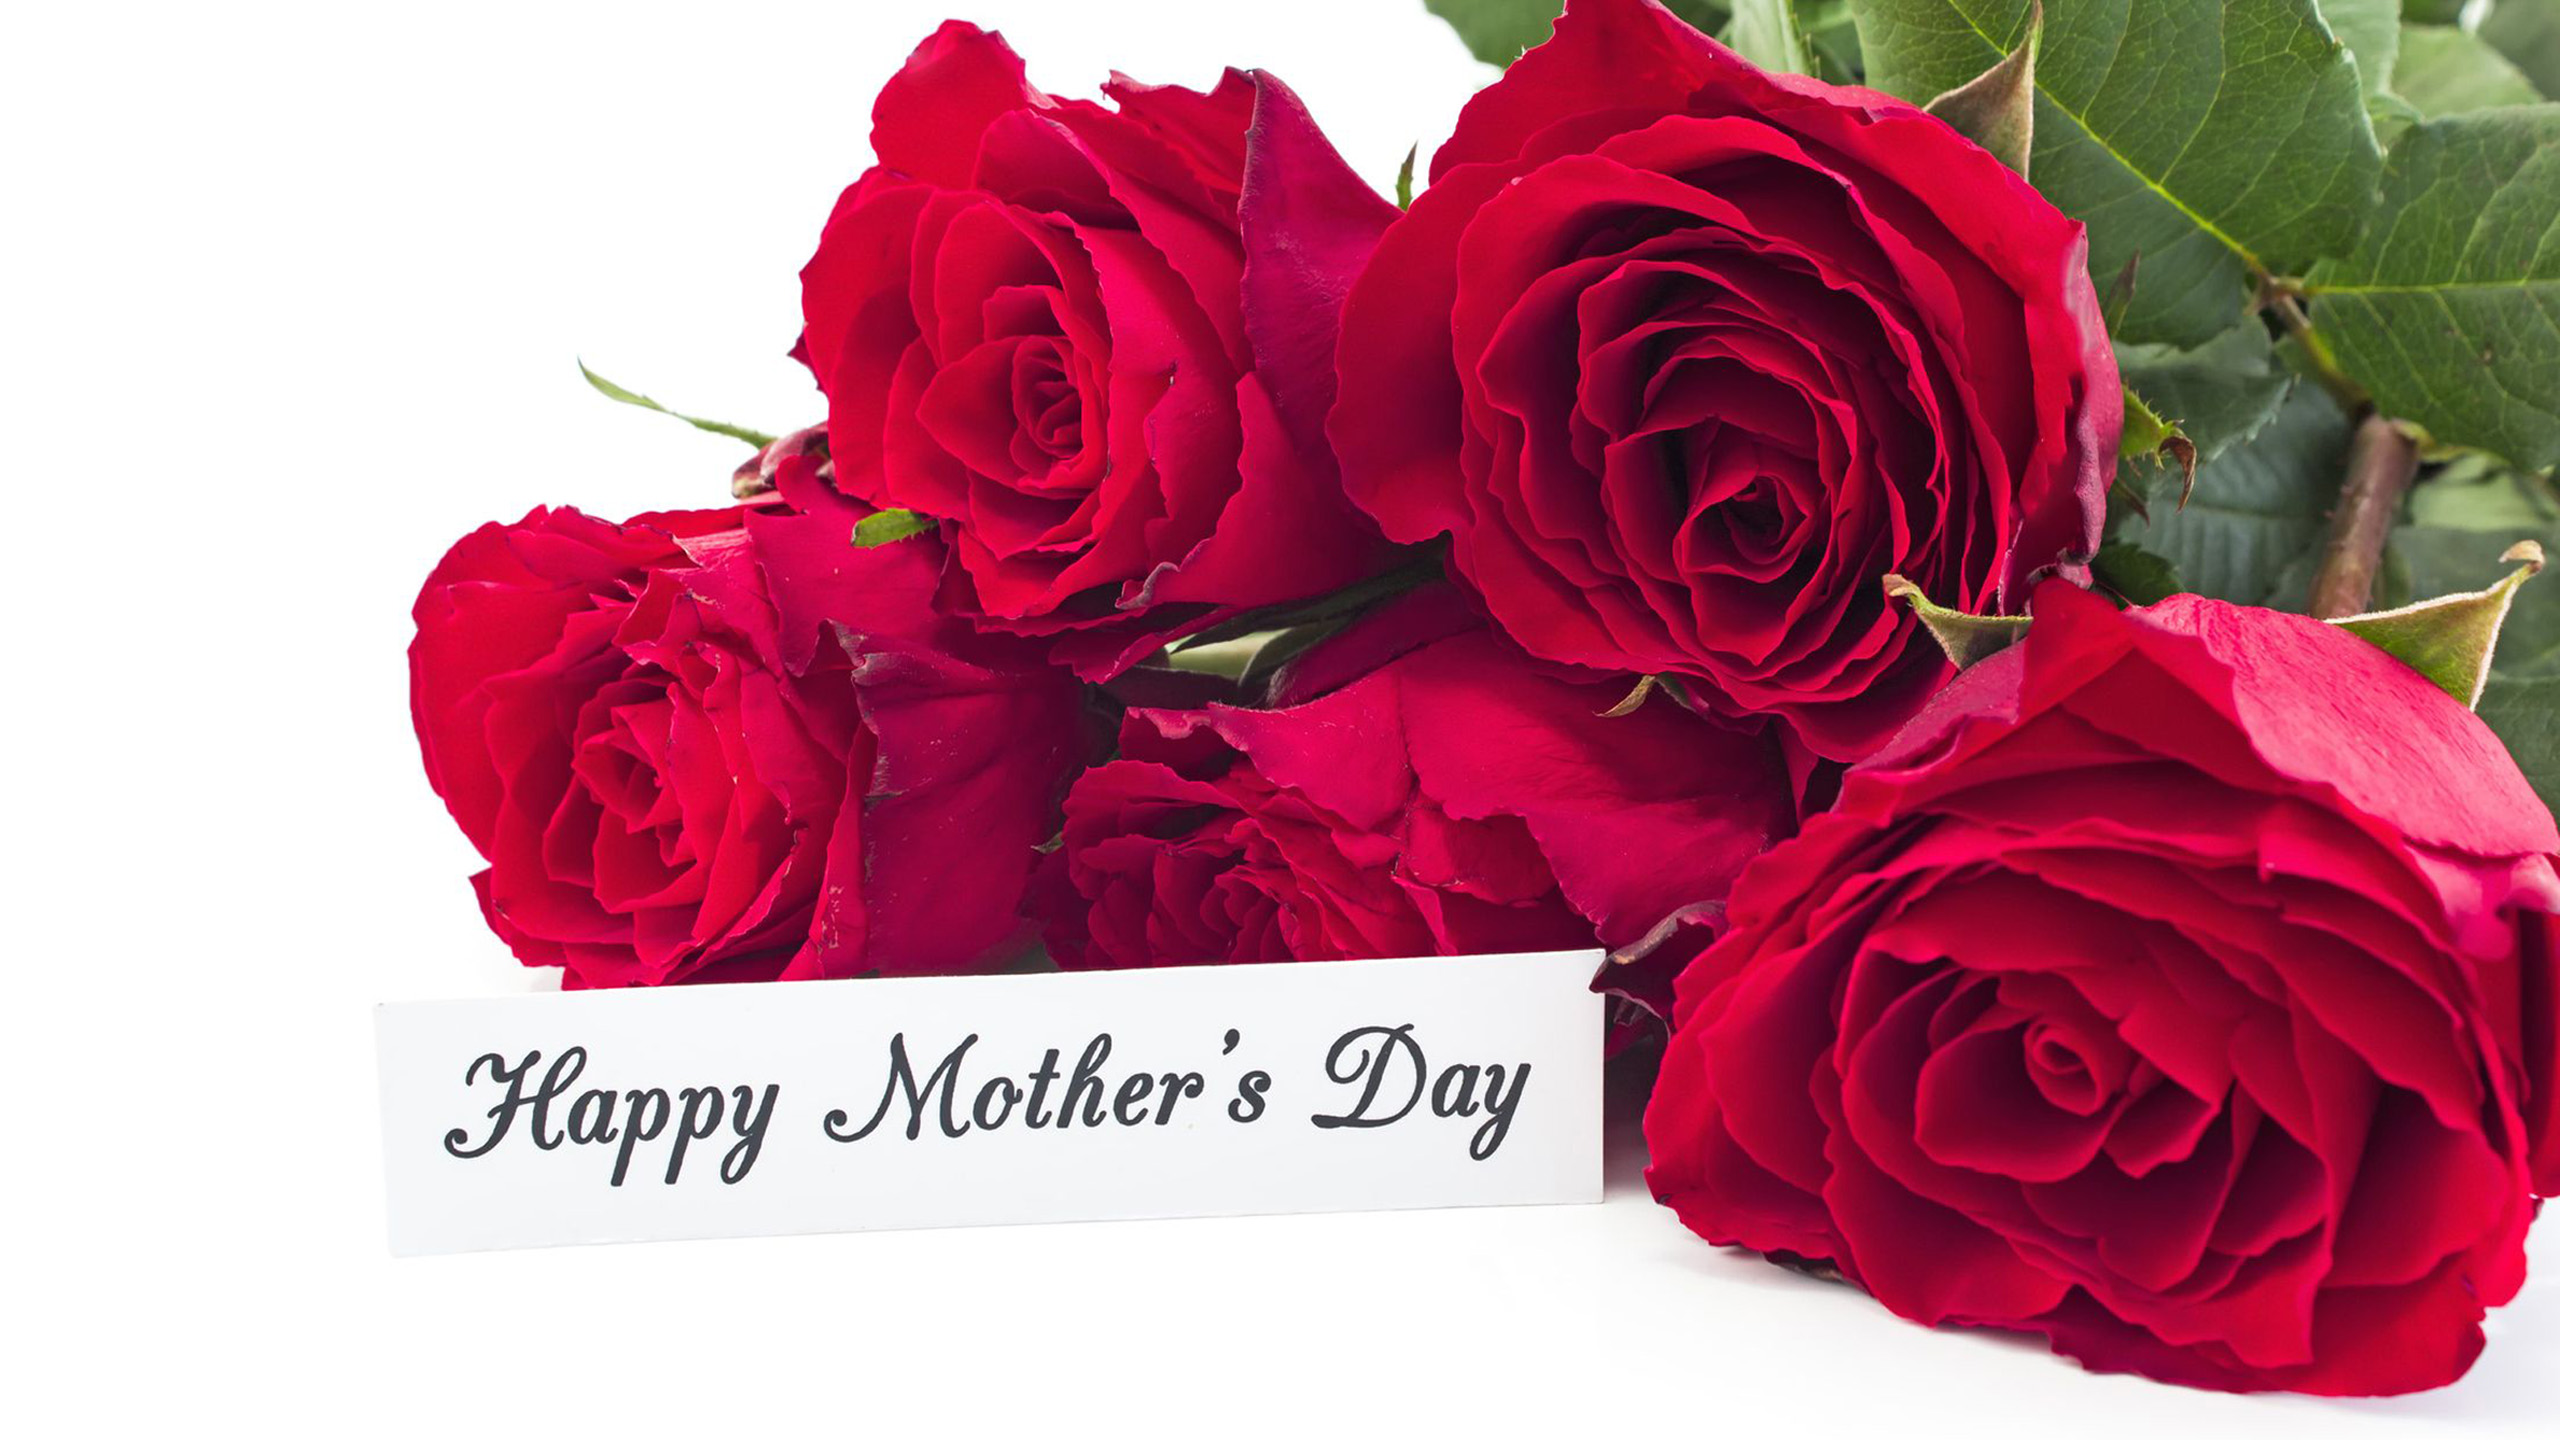 Happy Mothers Day Images, Photos, HD Wallpapers, Wishes, SMS Status